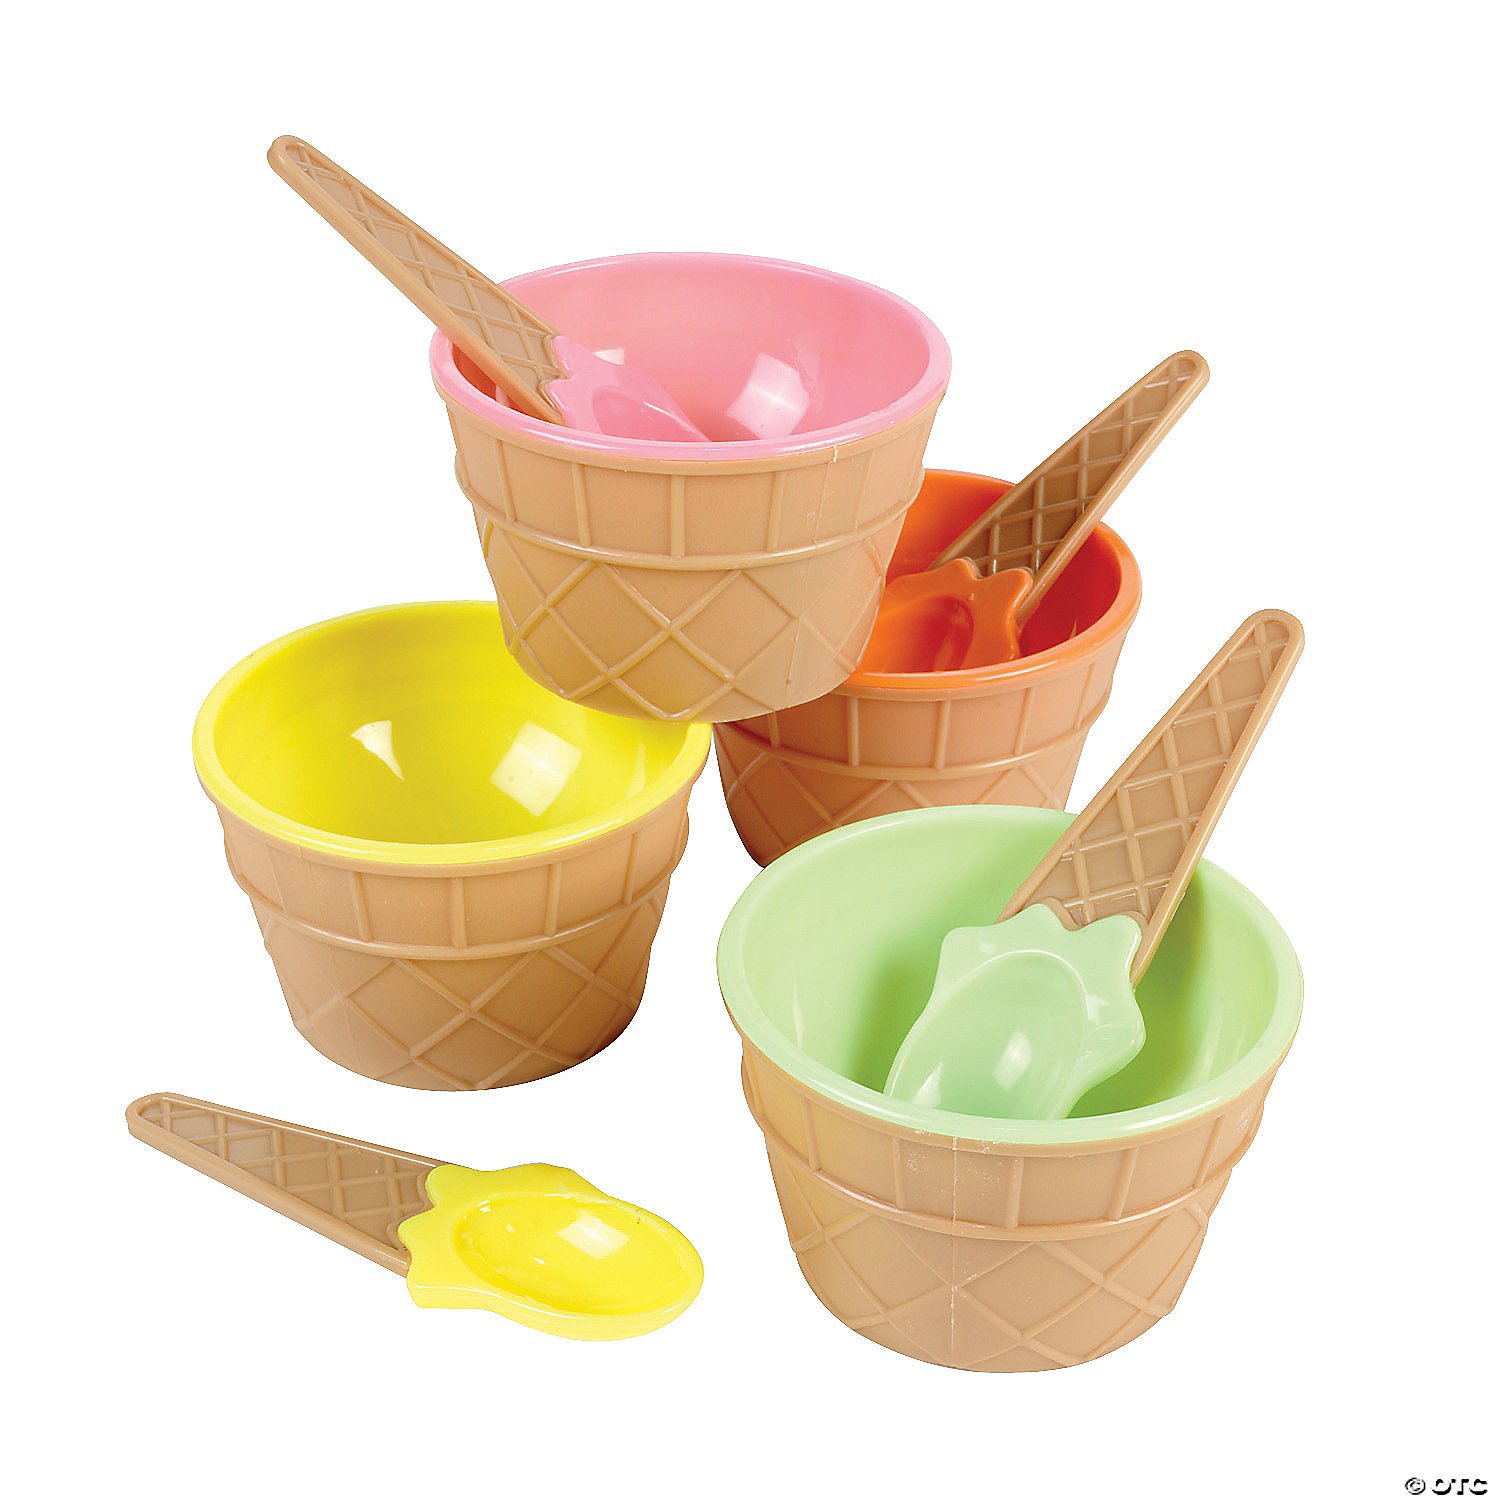 Certified International 22927SET6 Christmas Plaid 5.5 Ice Cream Bowl Set of 6 Assorted Designs One Size Mulicolored 